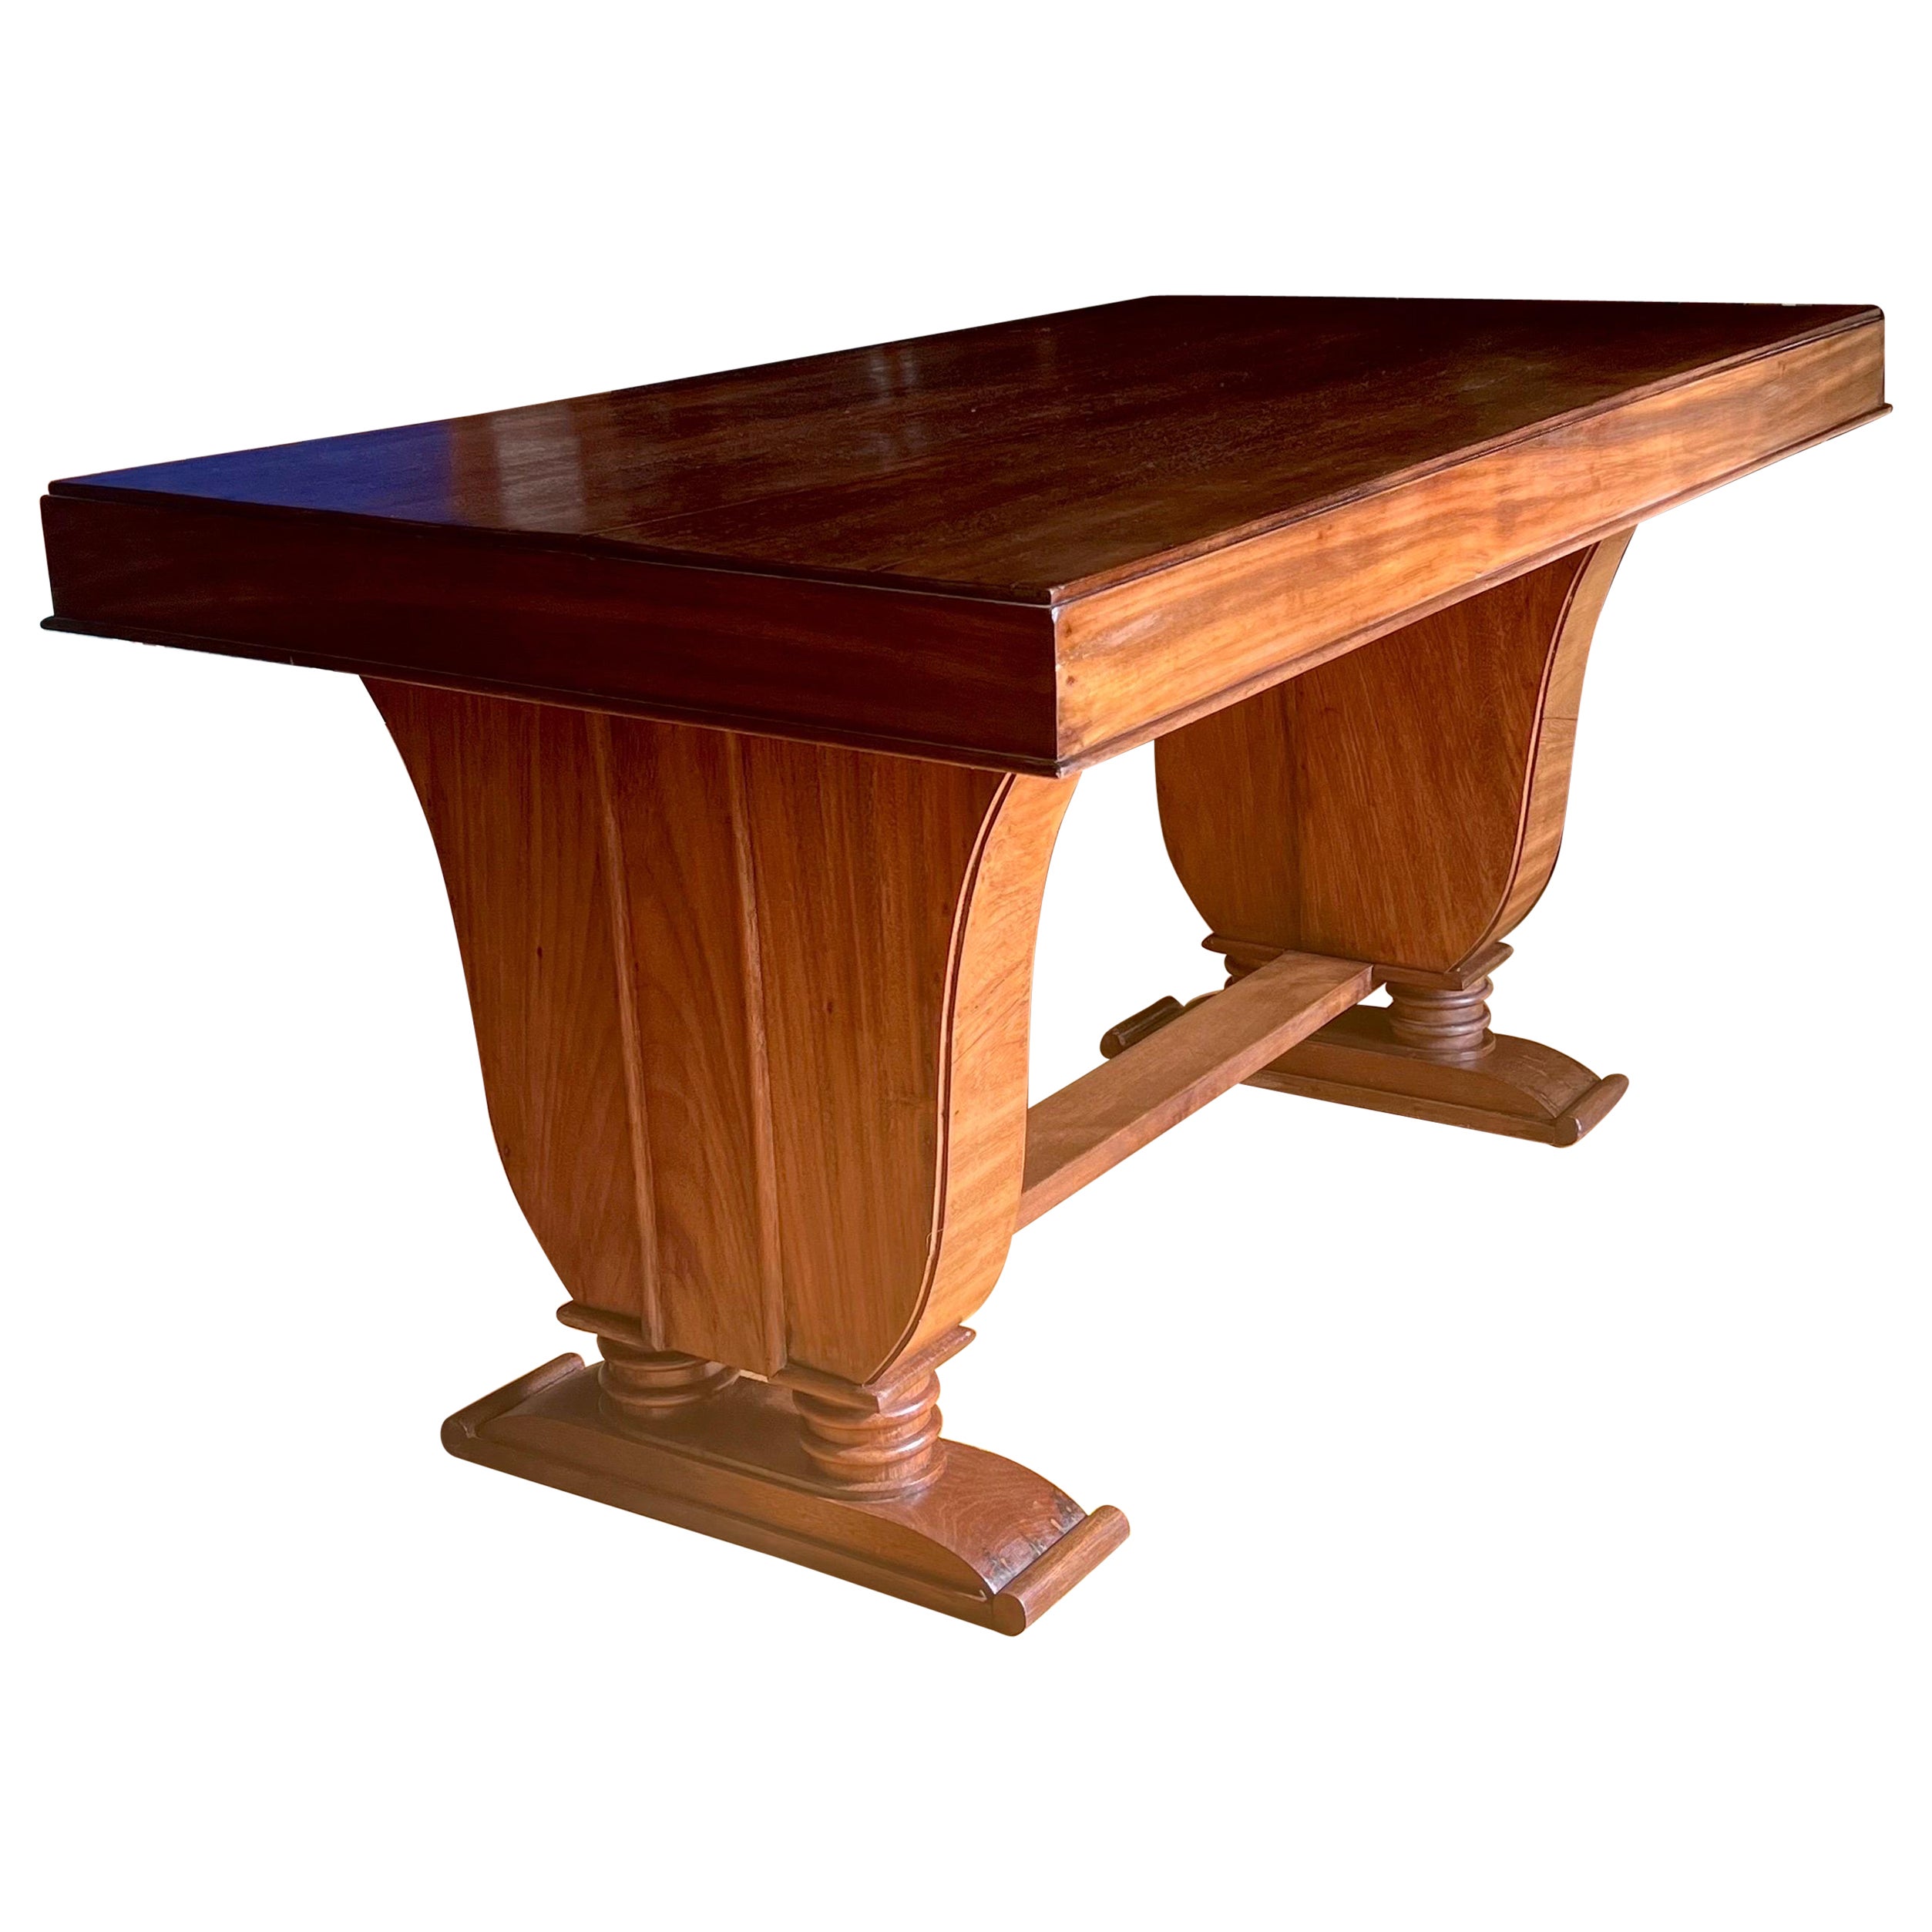 Rare French Art Deco Writing Table / Desk in Teak c. 1925, style of Andre Groult For Sale